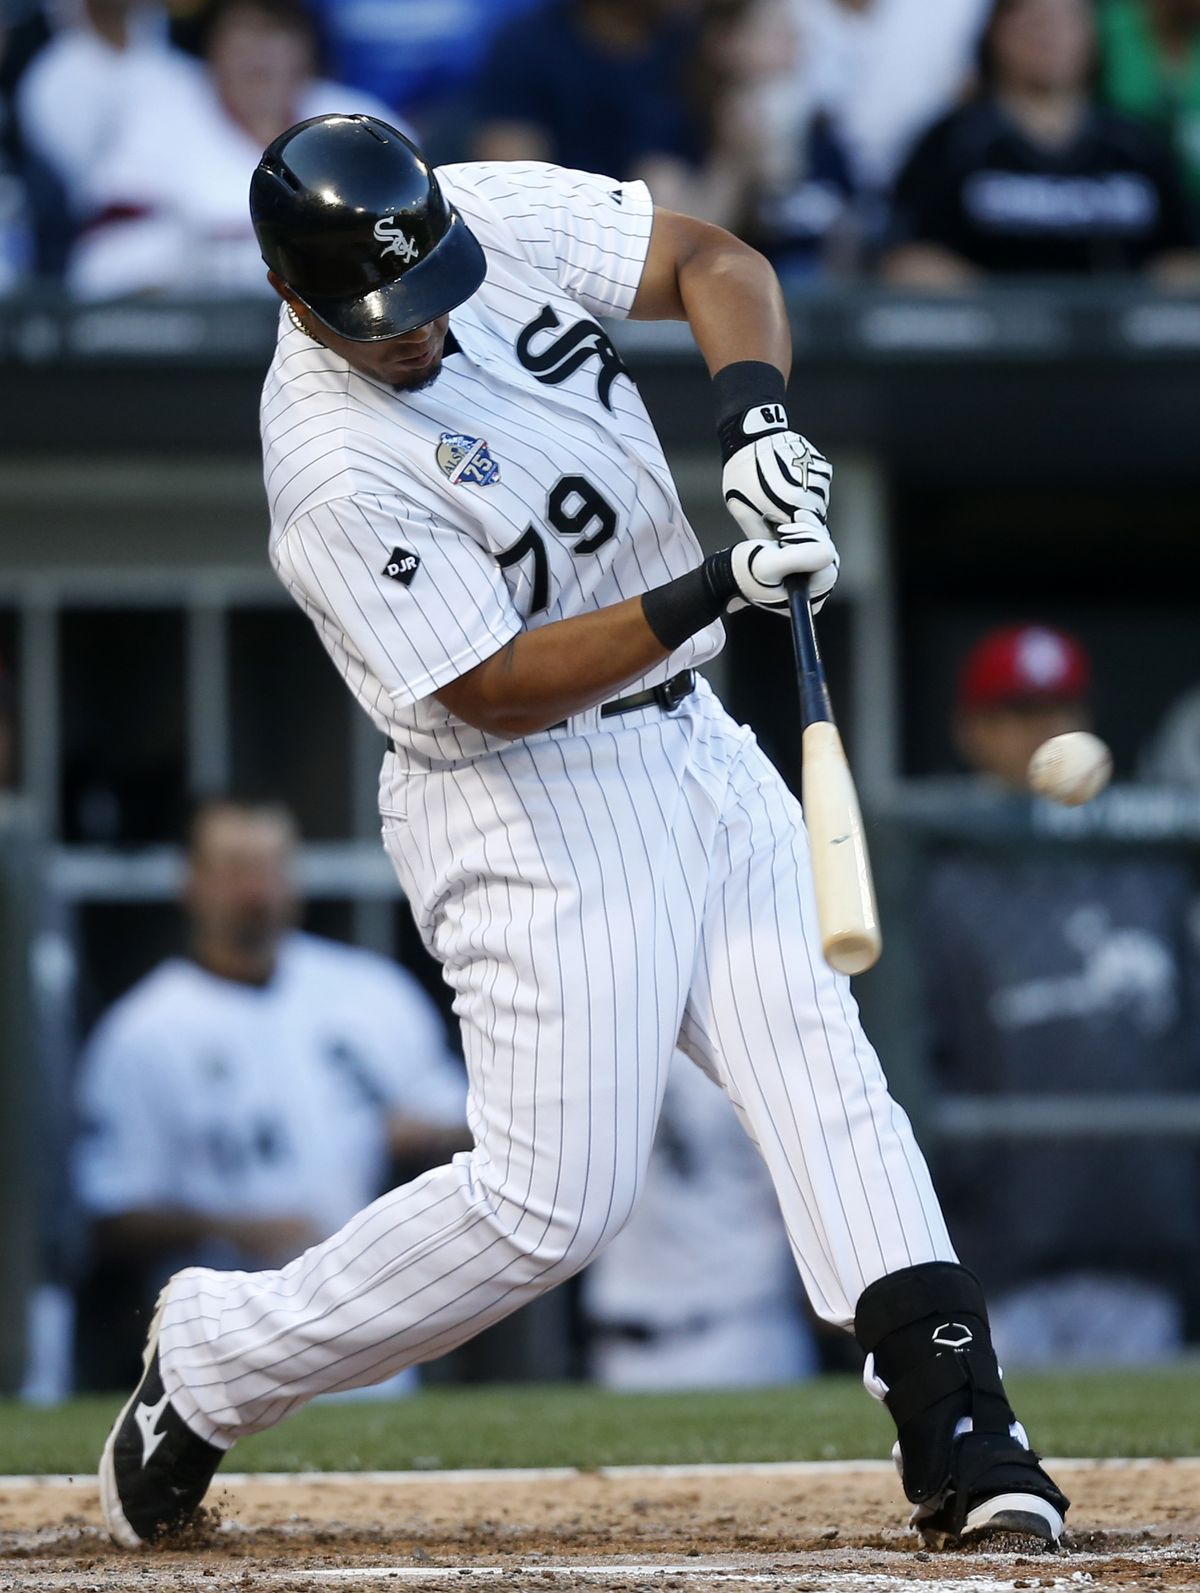 White Sox rookie Jose Abreu hits his 27th home run in the fifth inning. (Associated Press)